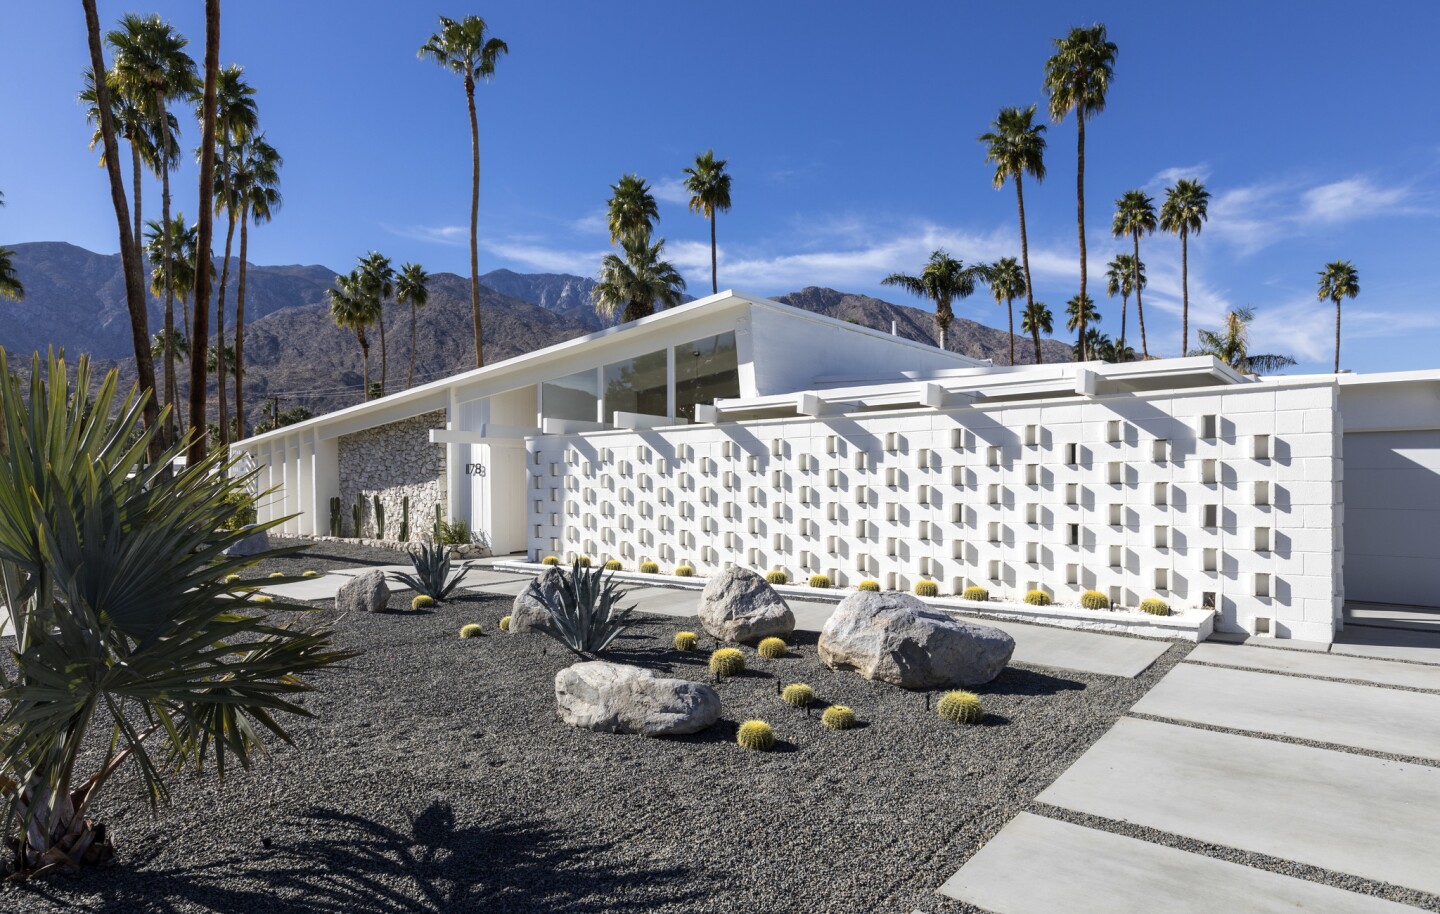 The facade of Ingrid Jackel's 1960 Palm Springs house features classic Midcentury Modern decorative concrete blocks.